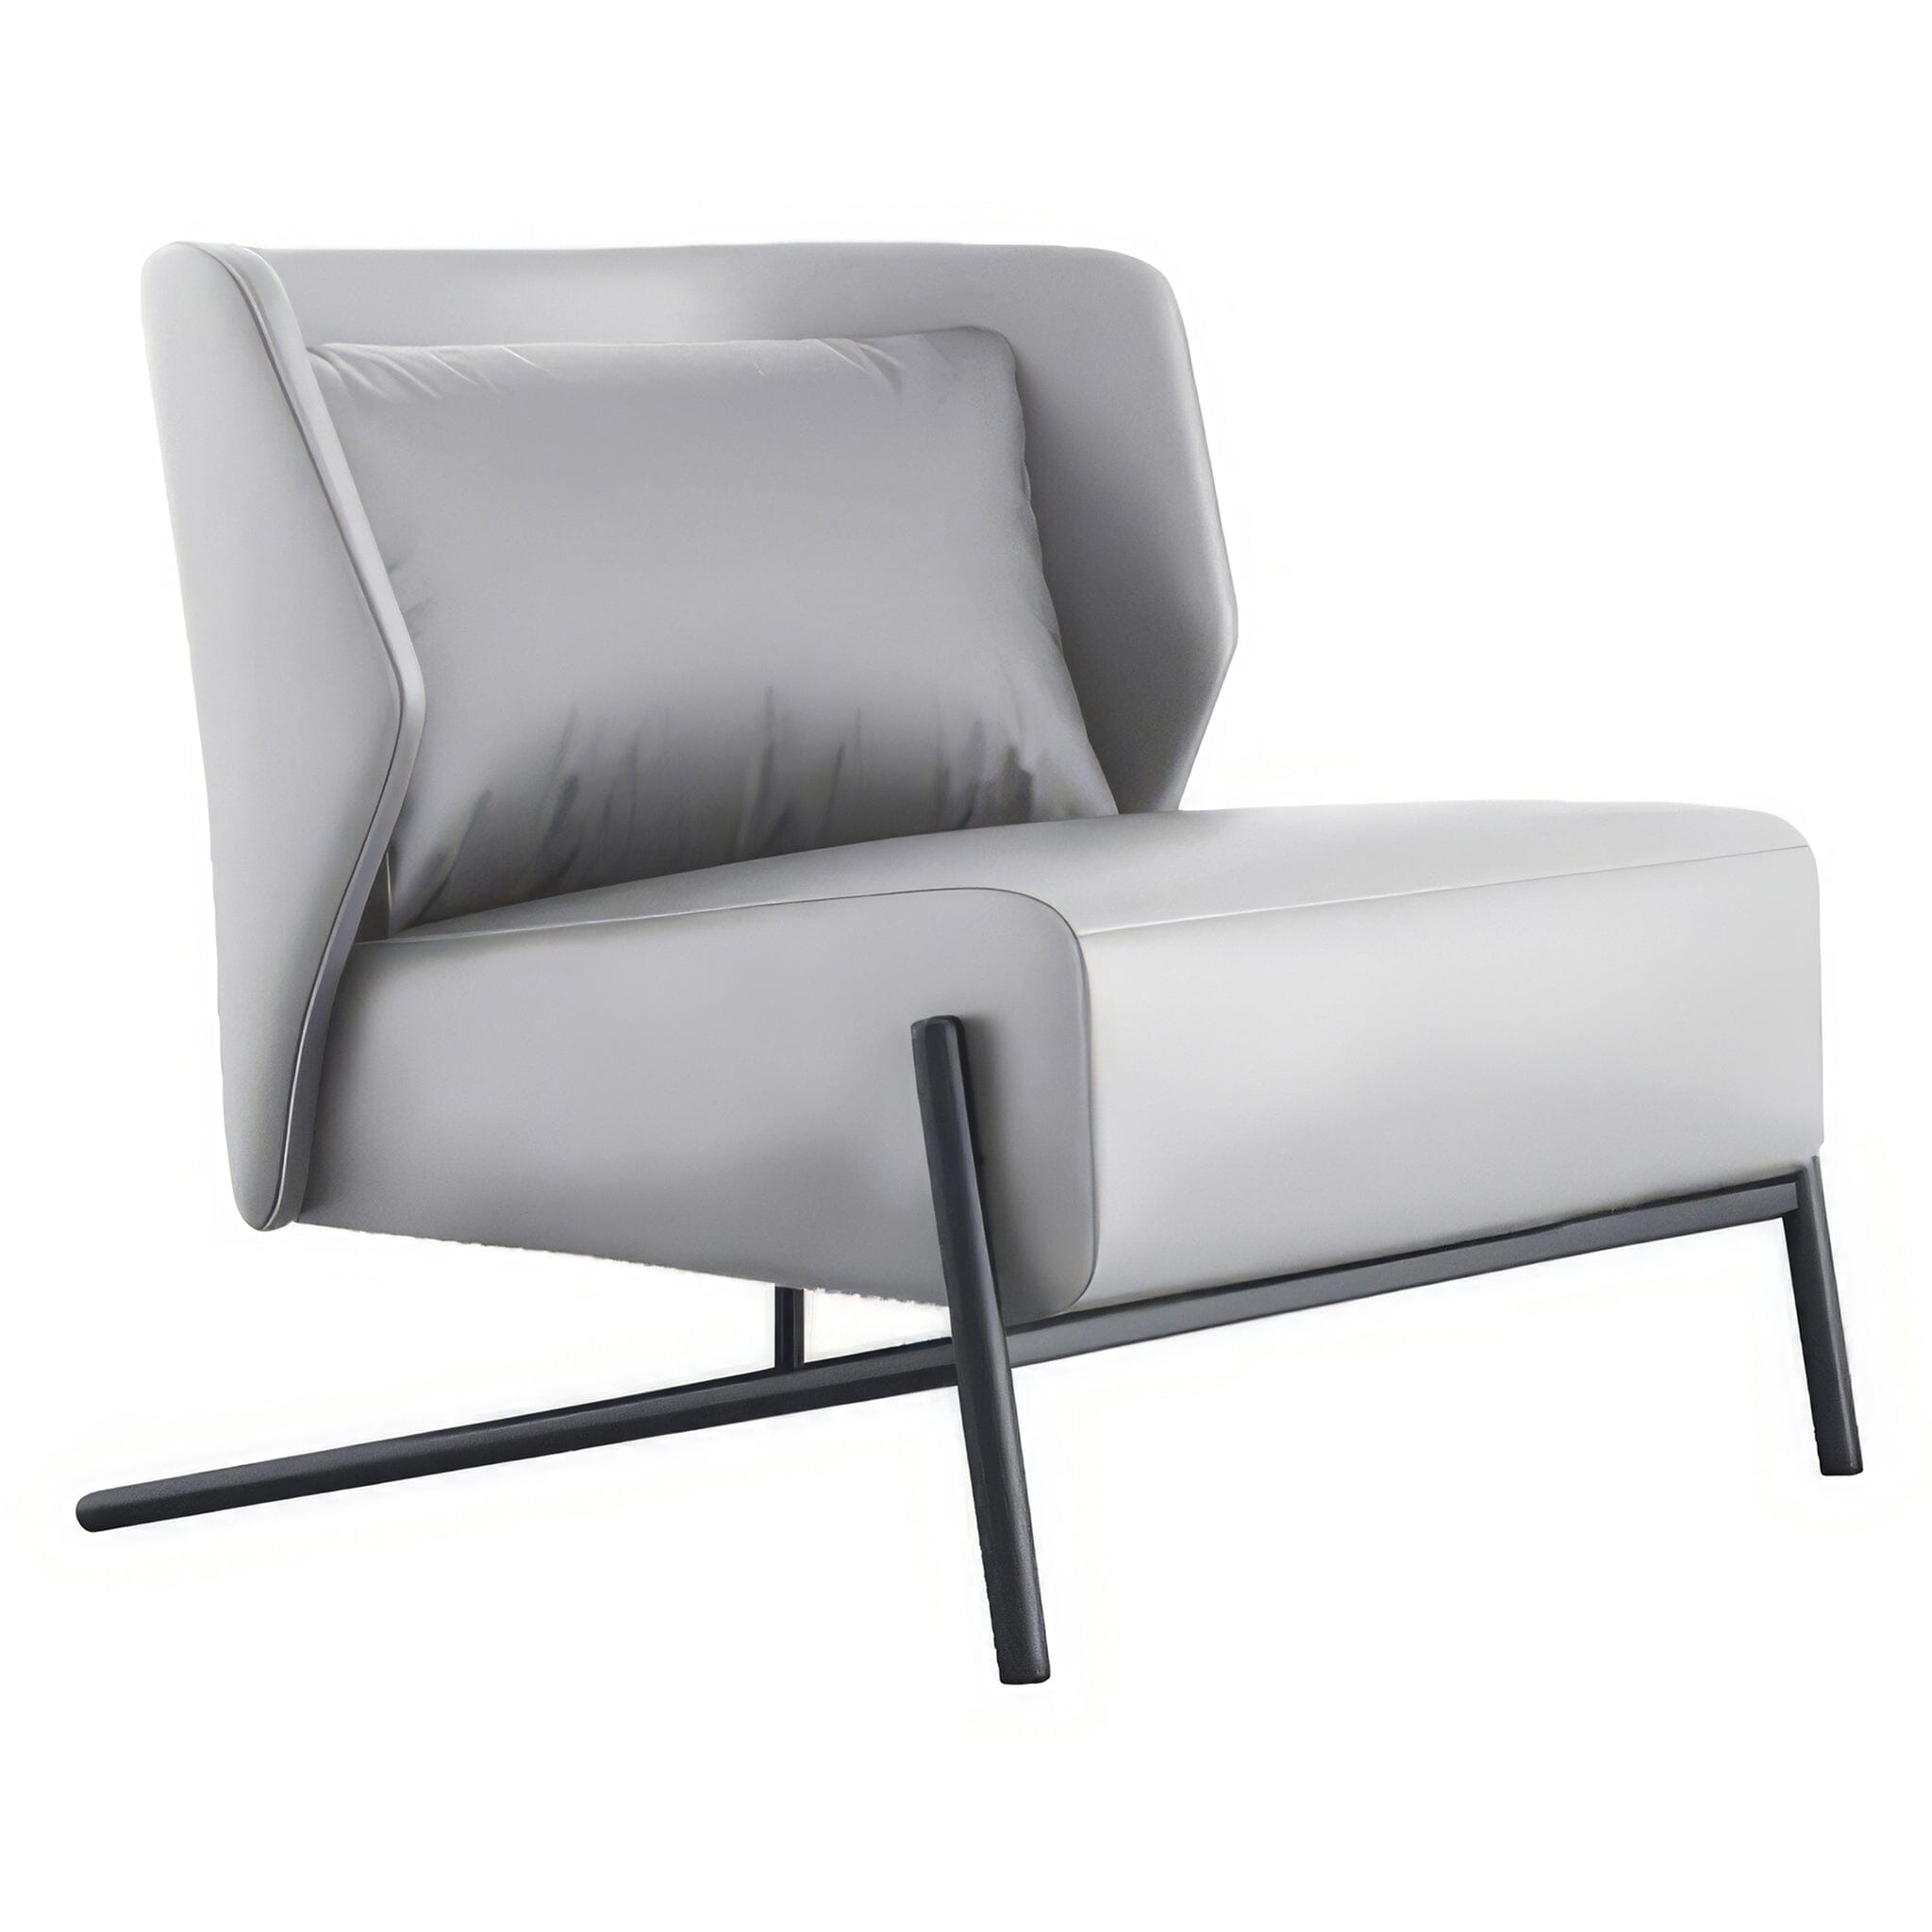 Estelle Occasional Chair Occasional Chair Grey 